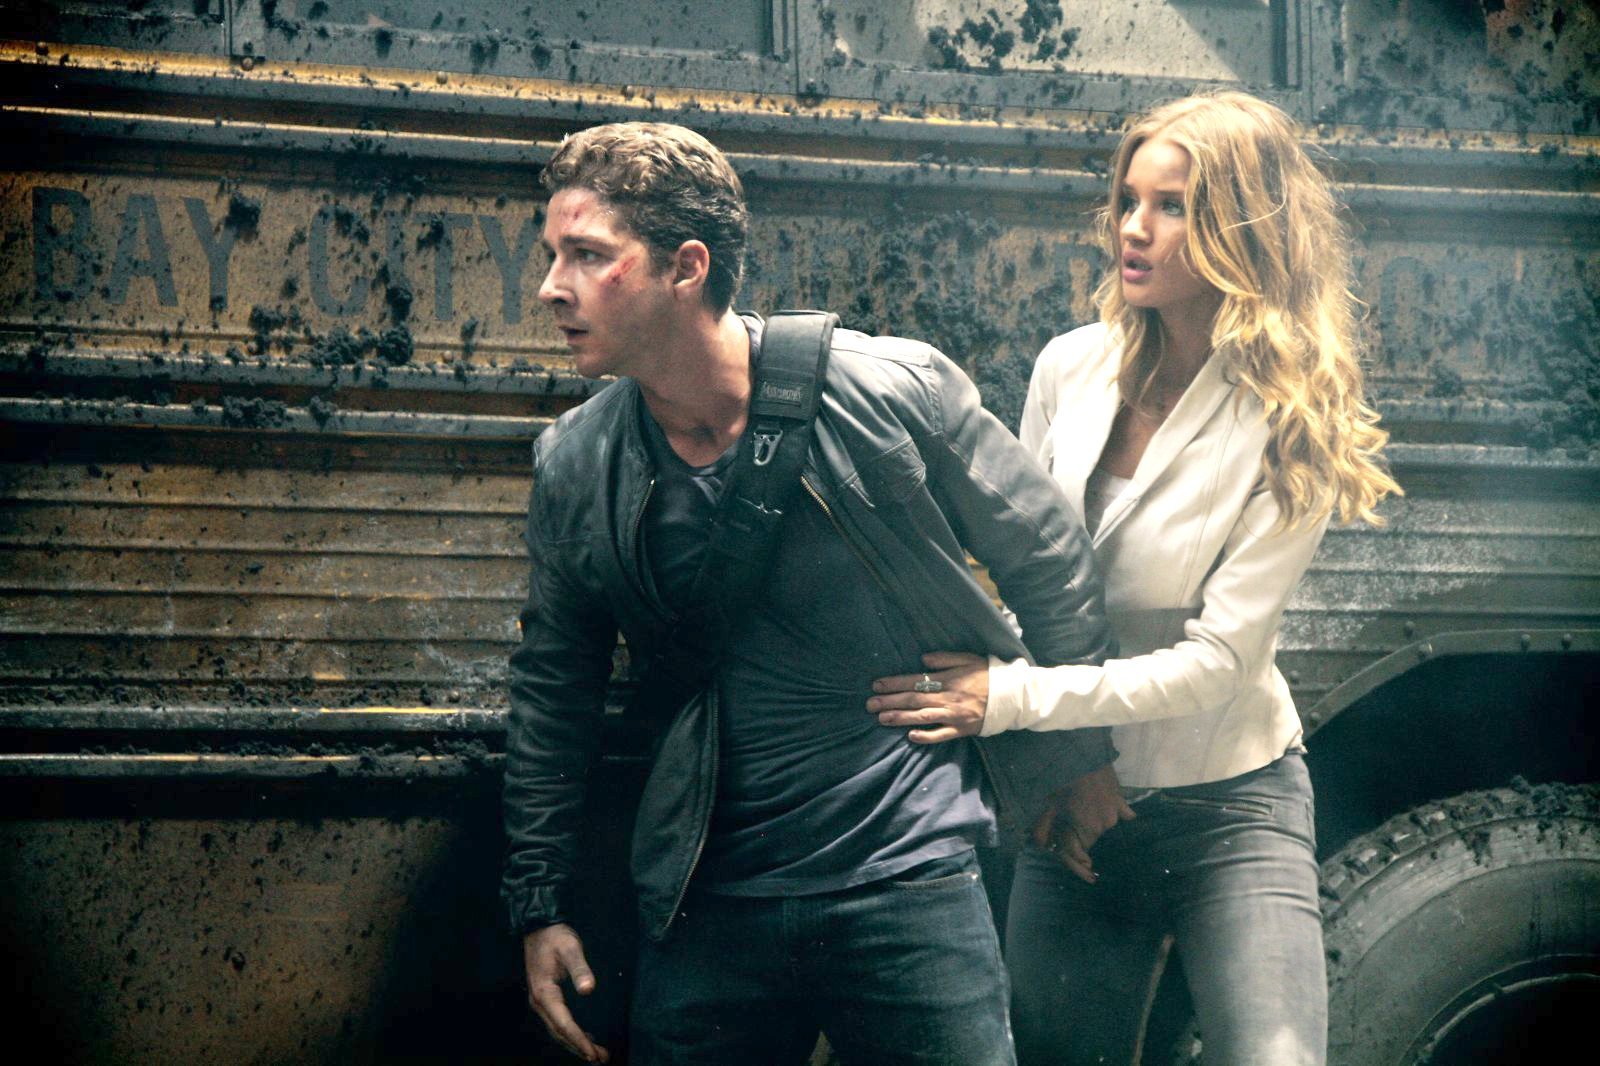 Shia LaBeouf stars as Sam Witwicky and Rosie Huntington-Whiteley stars as Carly in DreamWorks SKG's Transformers: Dark of the Moon (2011)